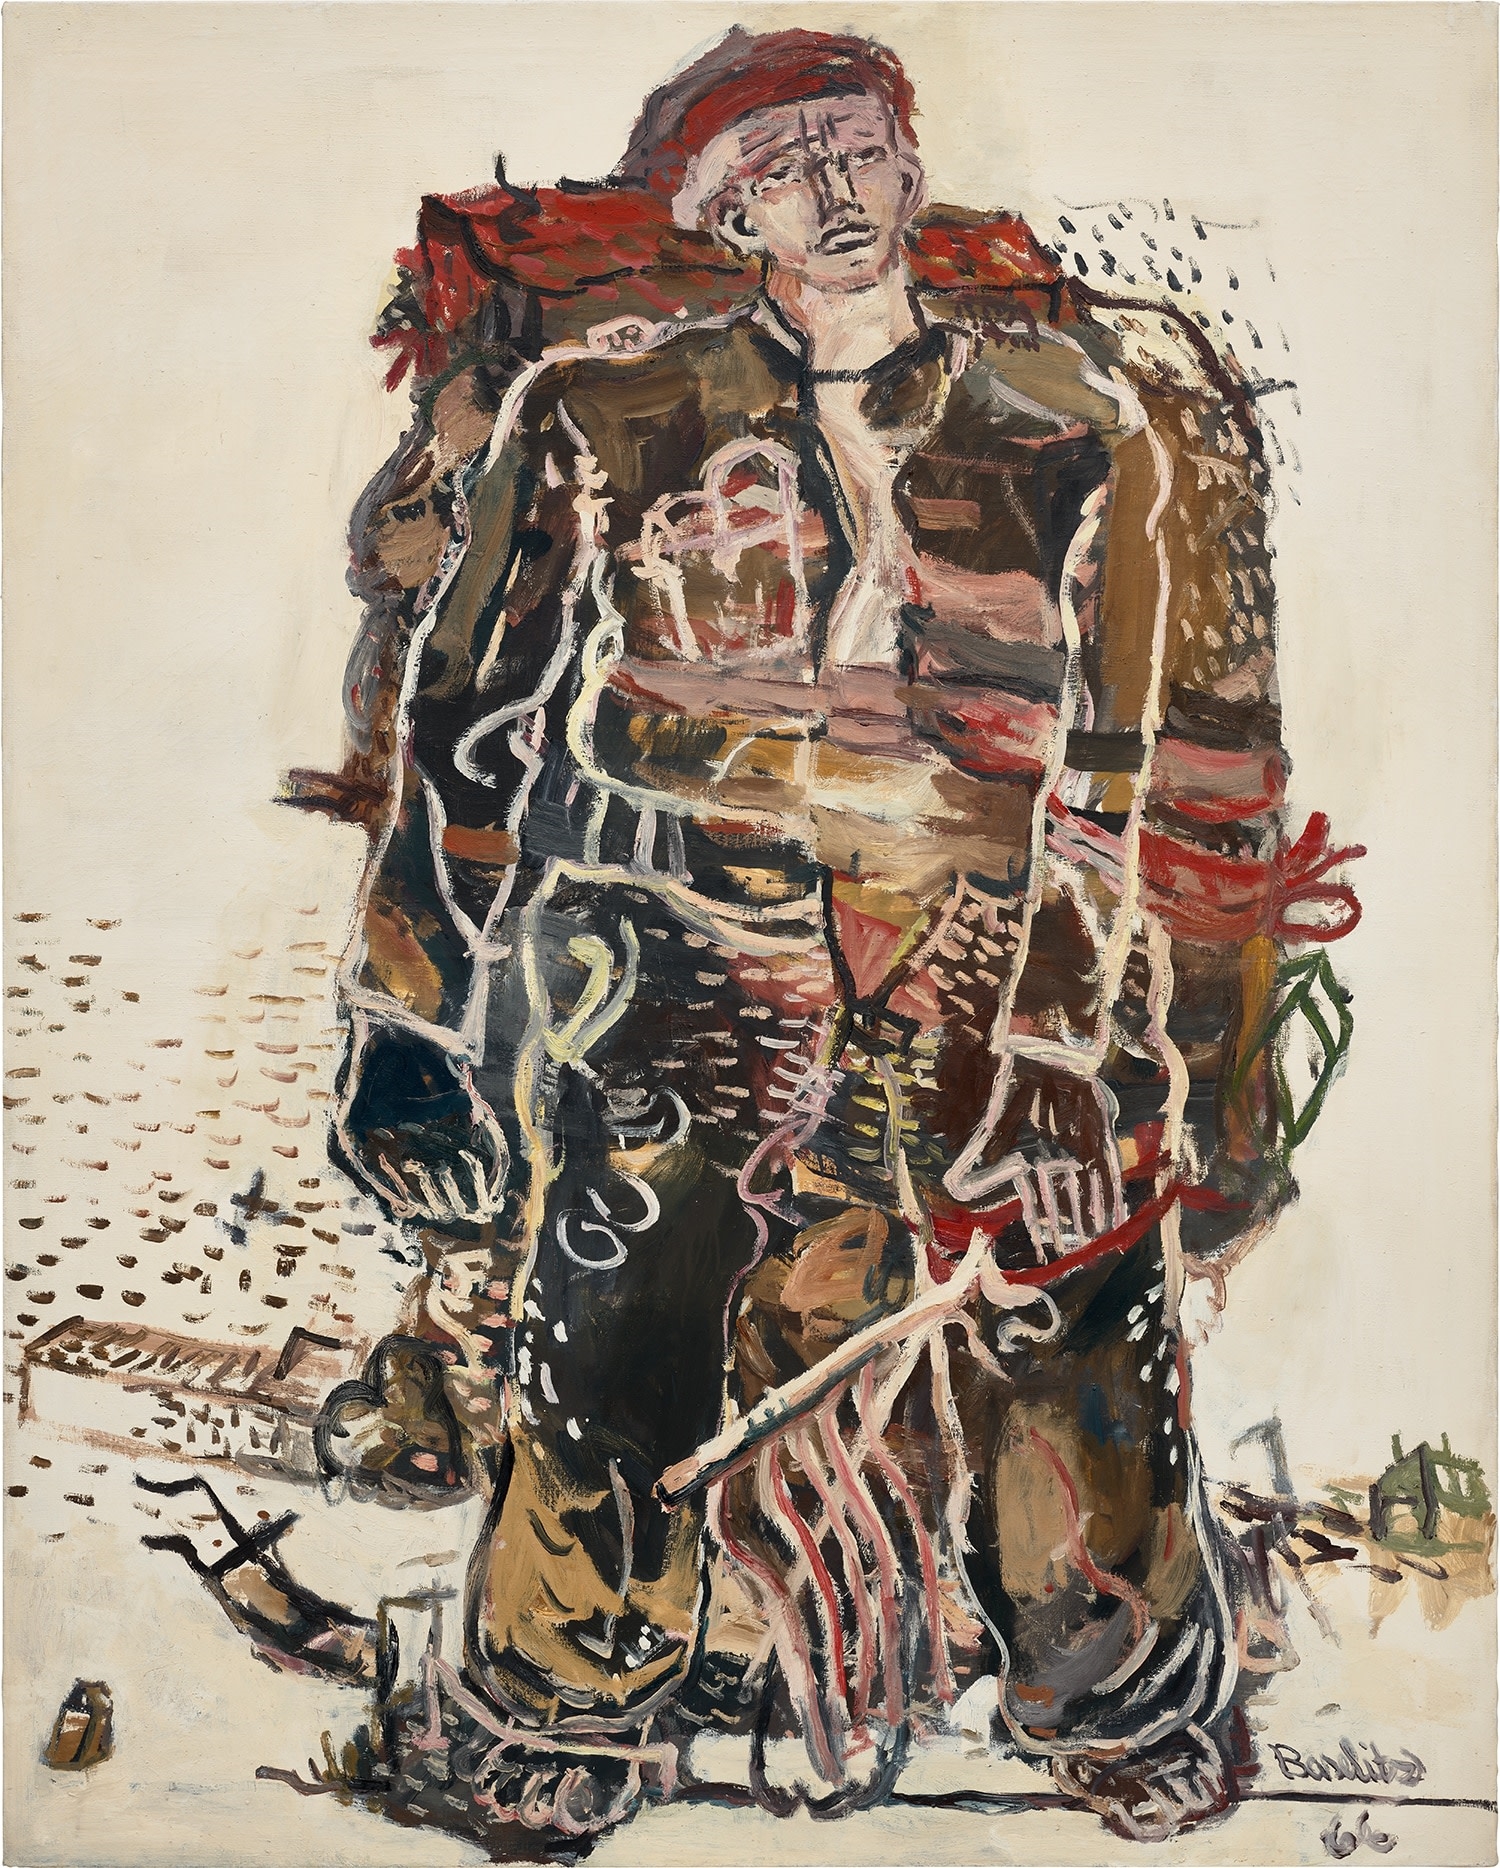 Ein Roter by Georg Baselitz, Painted in 1966